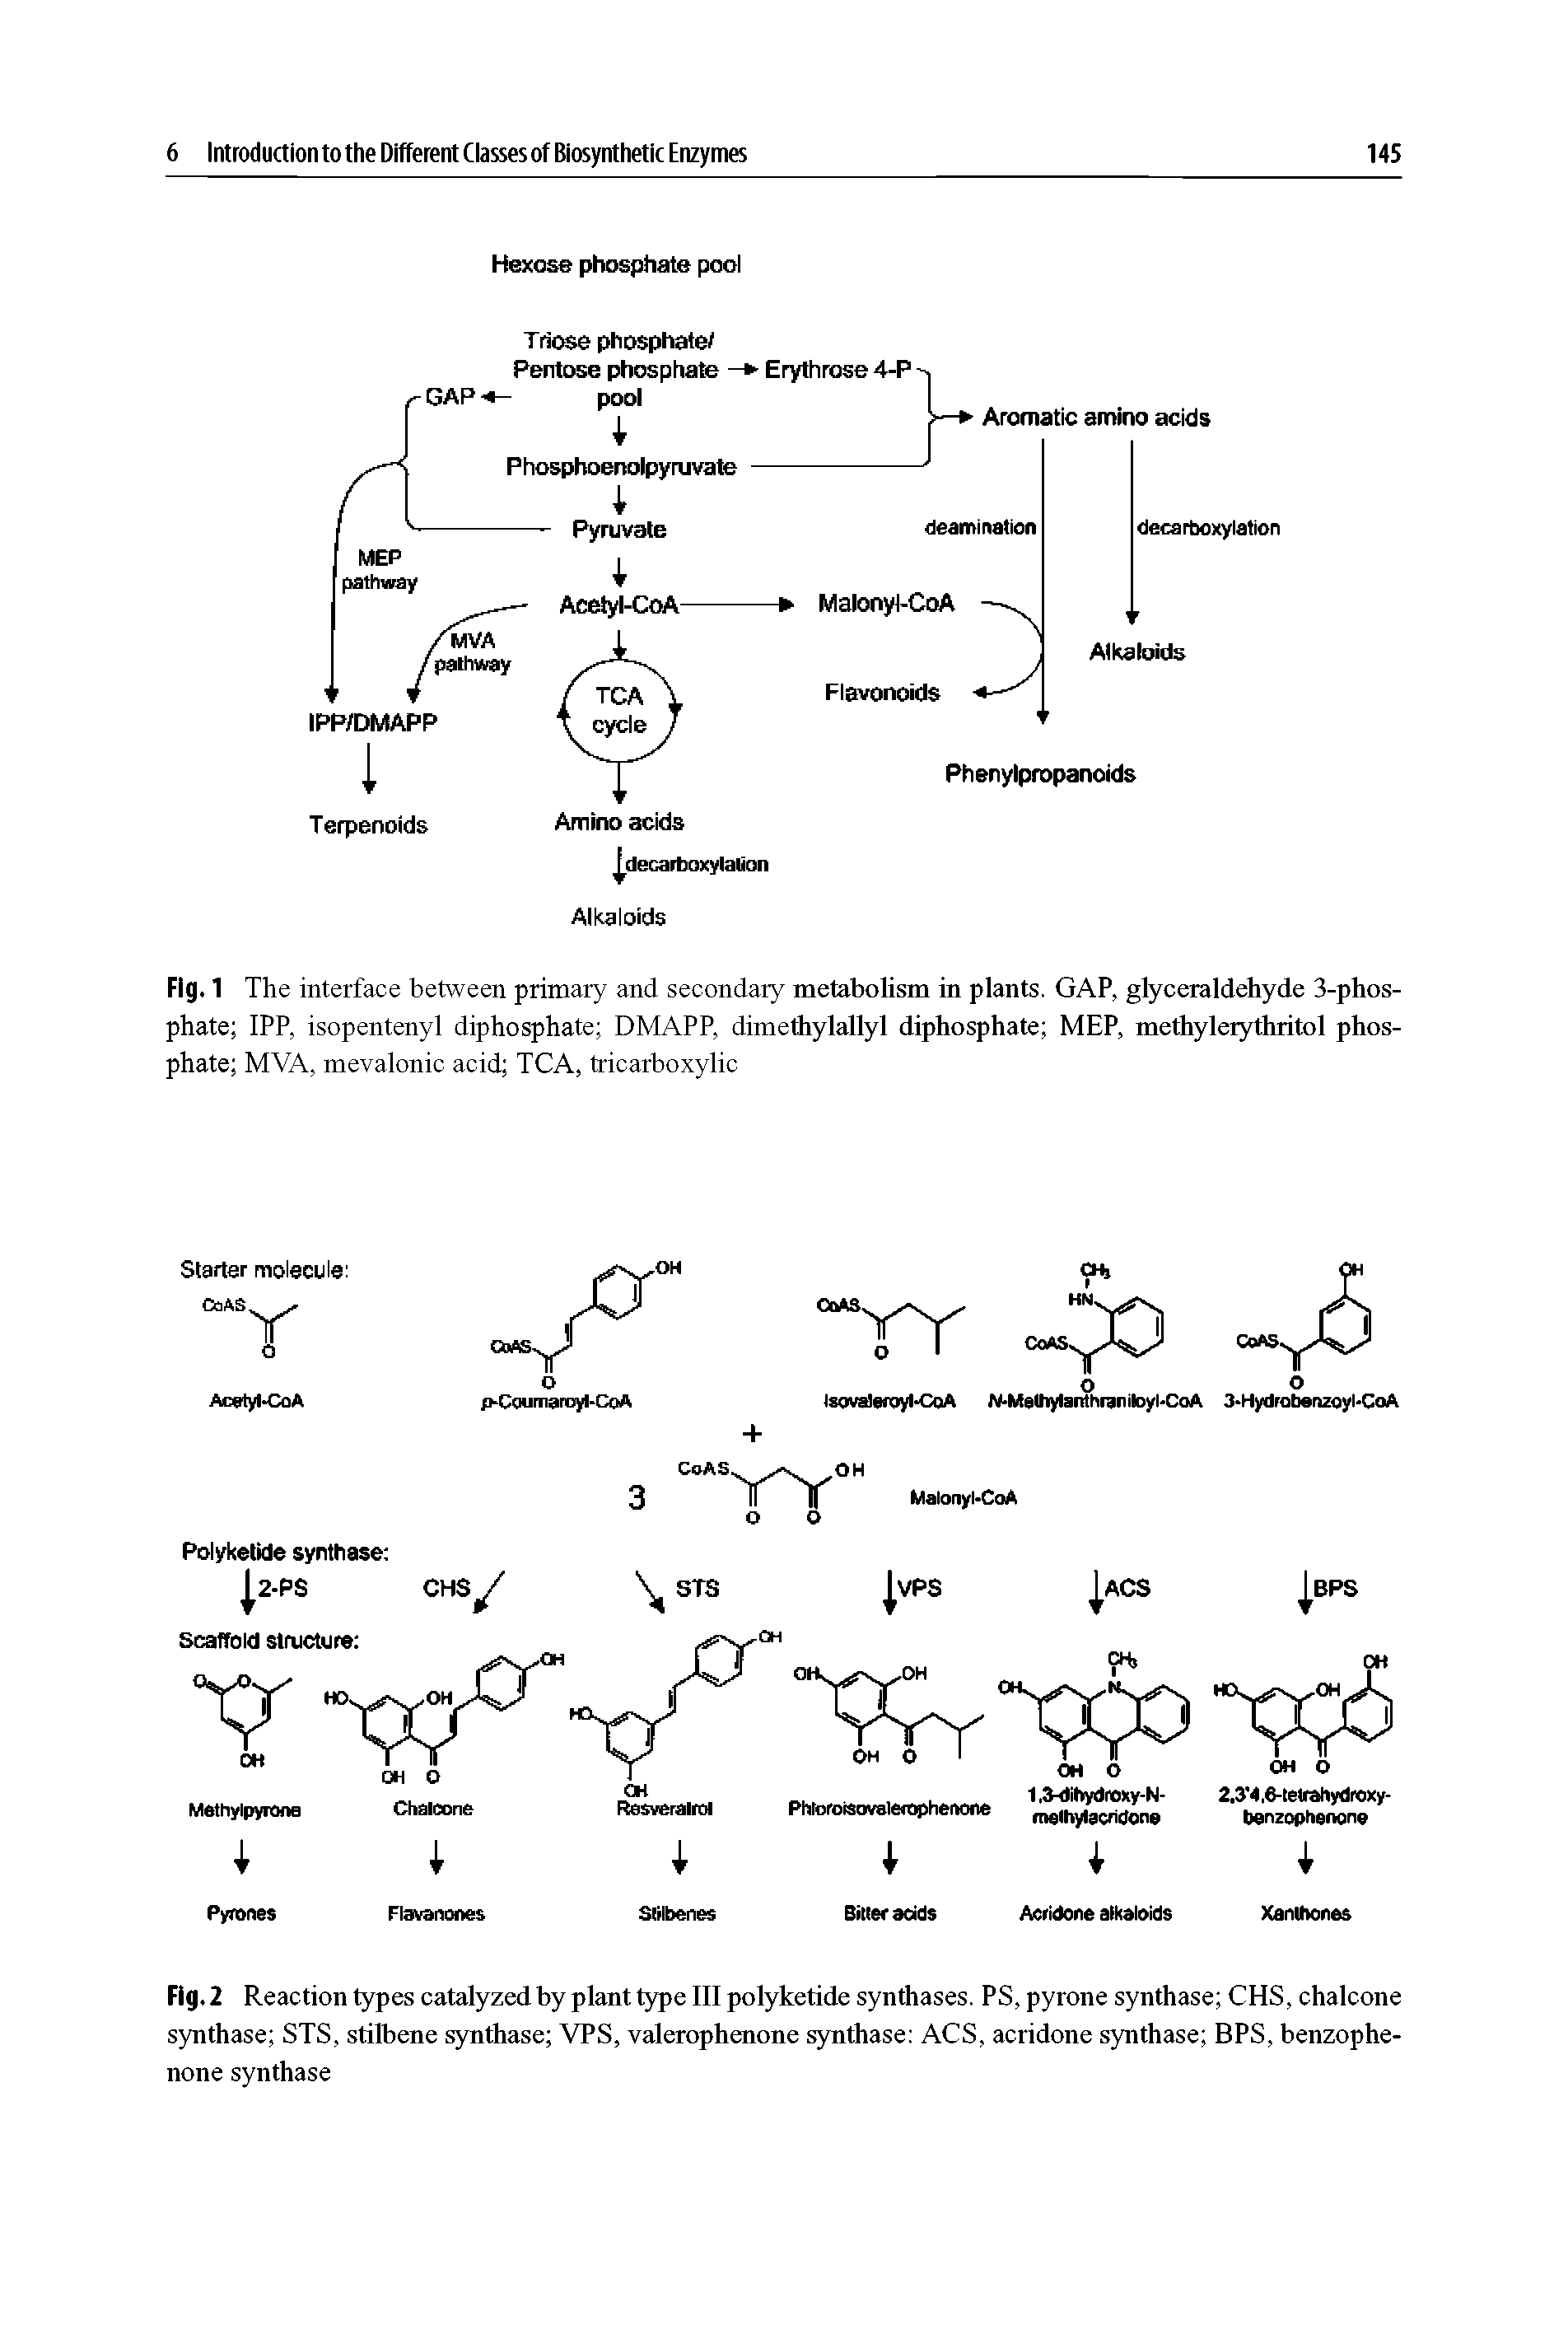 Fig. 2 Reaction types catalyzed by plant type III polyketide synthases. PS, pyrone synthase CHS, chalcone synthase STS, stilbene synthase VPS, valerophenone synthase ACS, acridone synthase BPS, benzophe-none synthase...